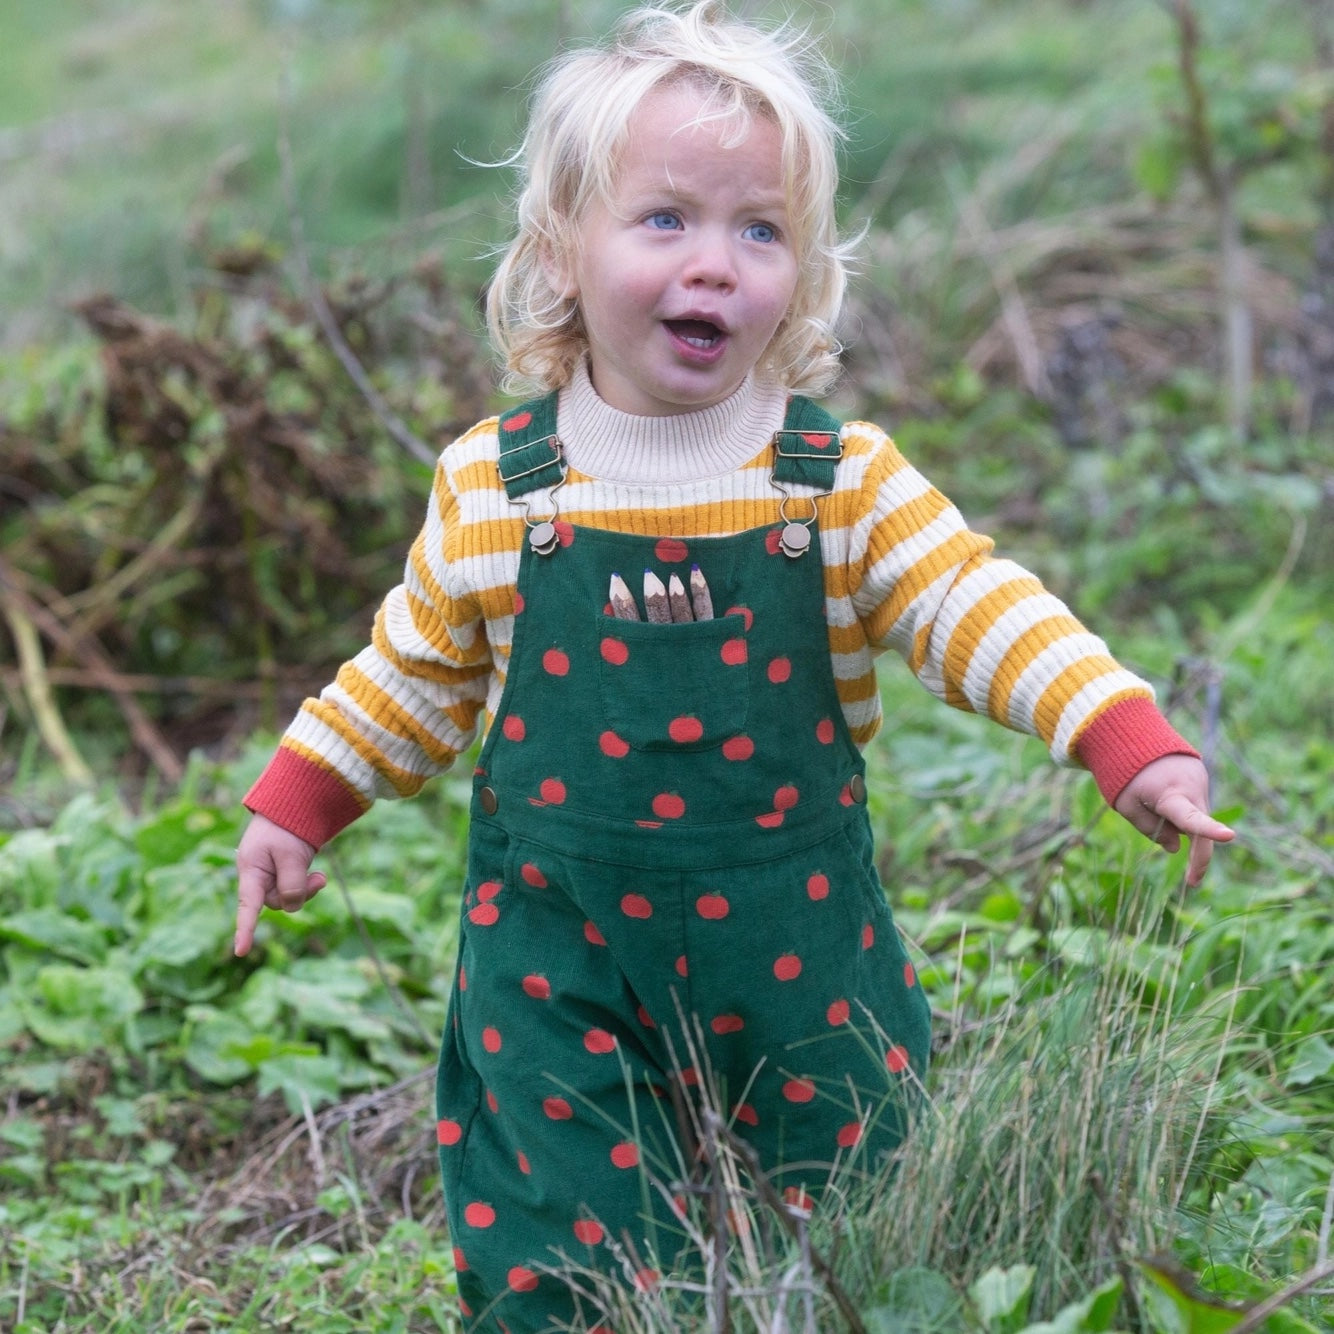 child running outside wearing a yellow and white striped sweater under apple printed corduroy overalls